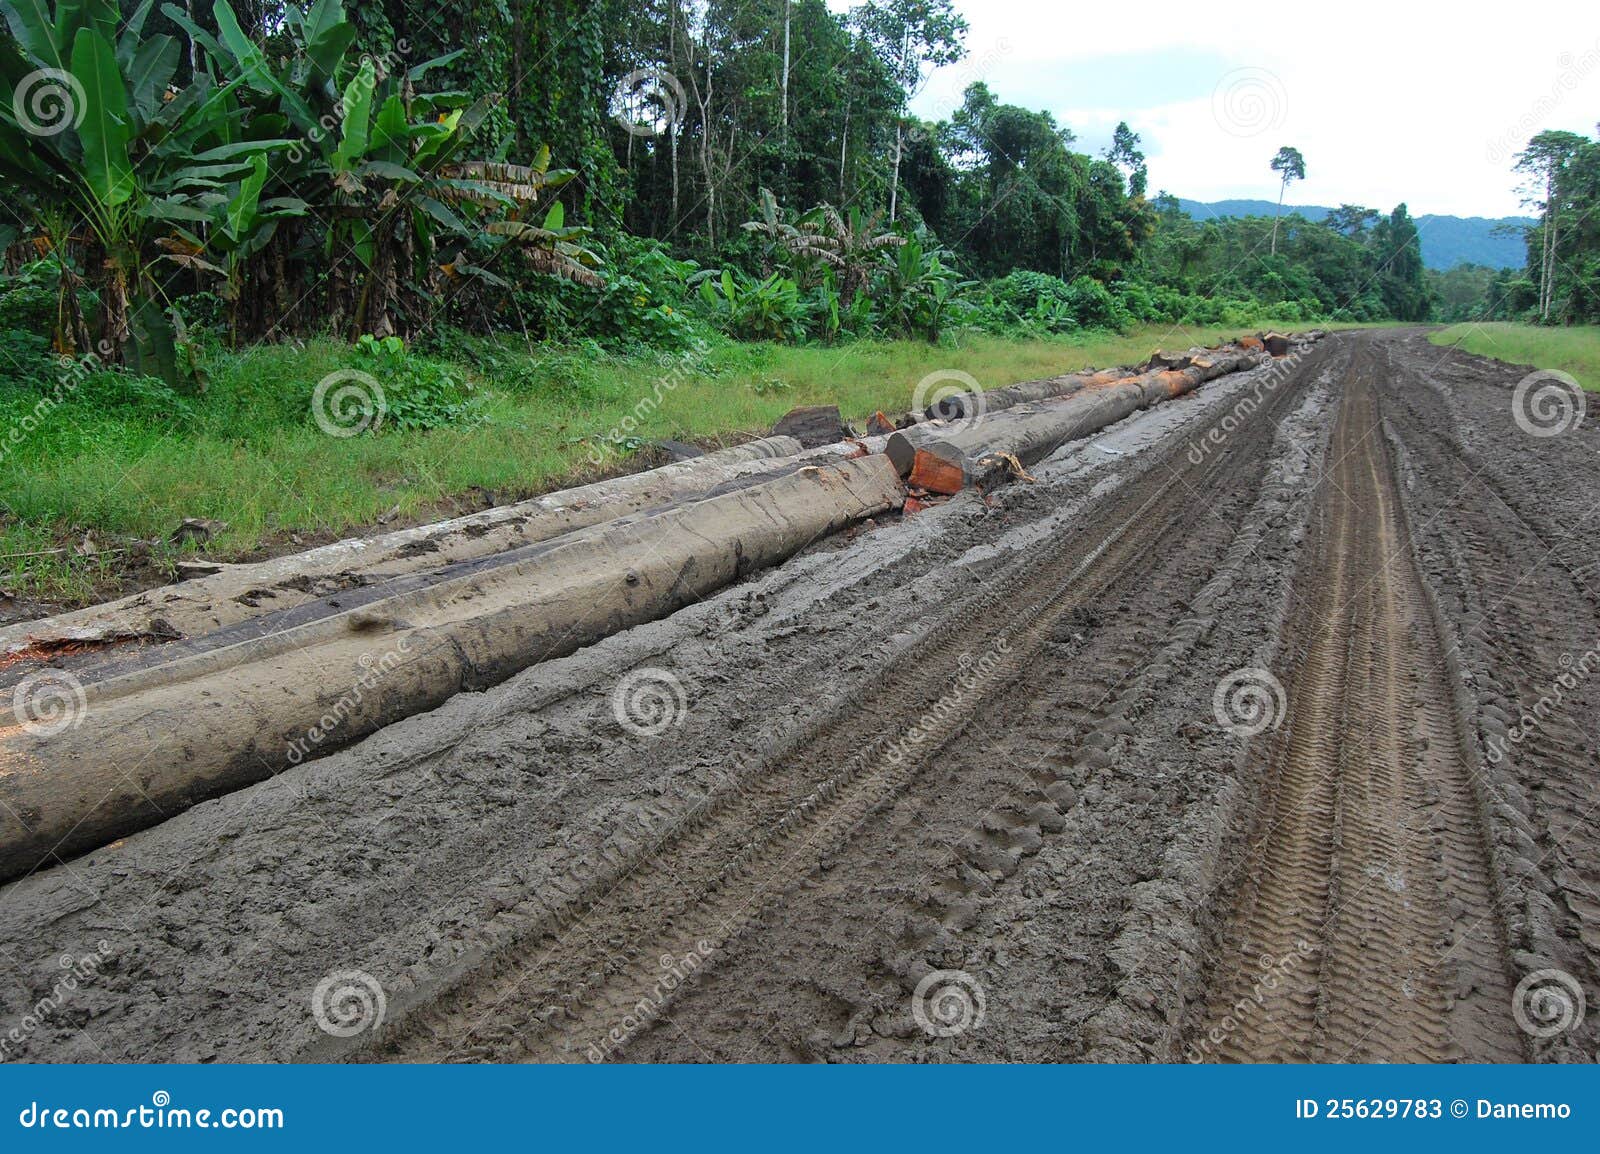 haulage road in outback of papua new guinea